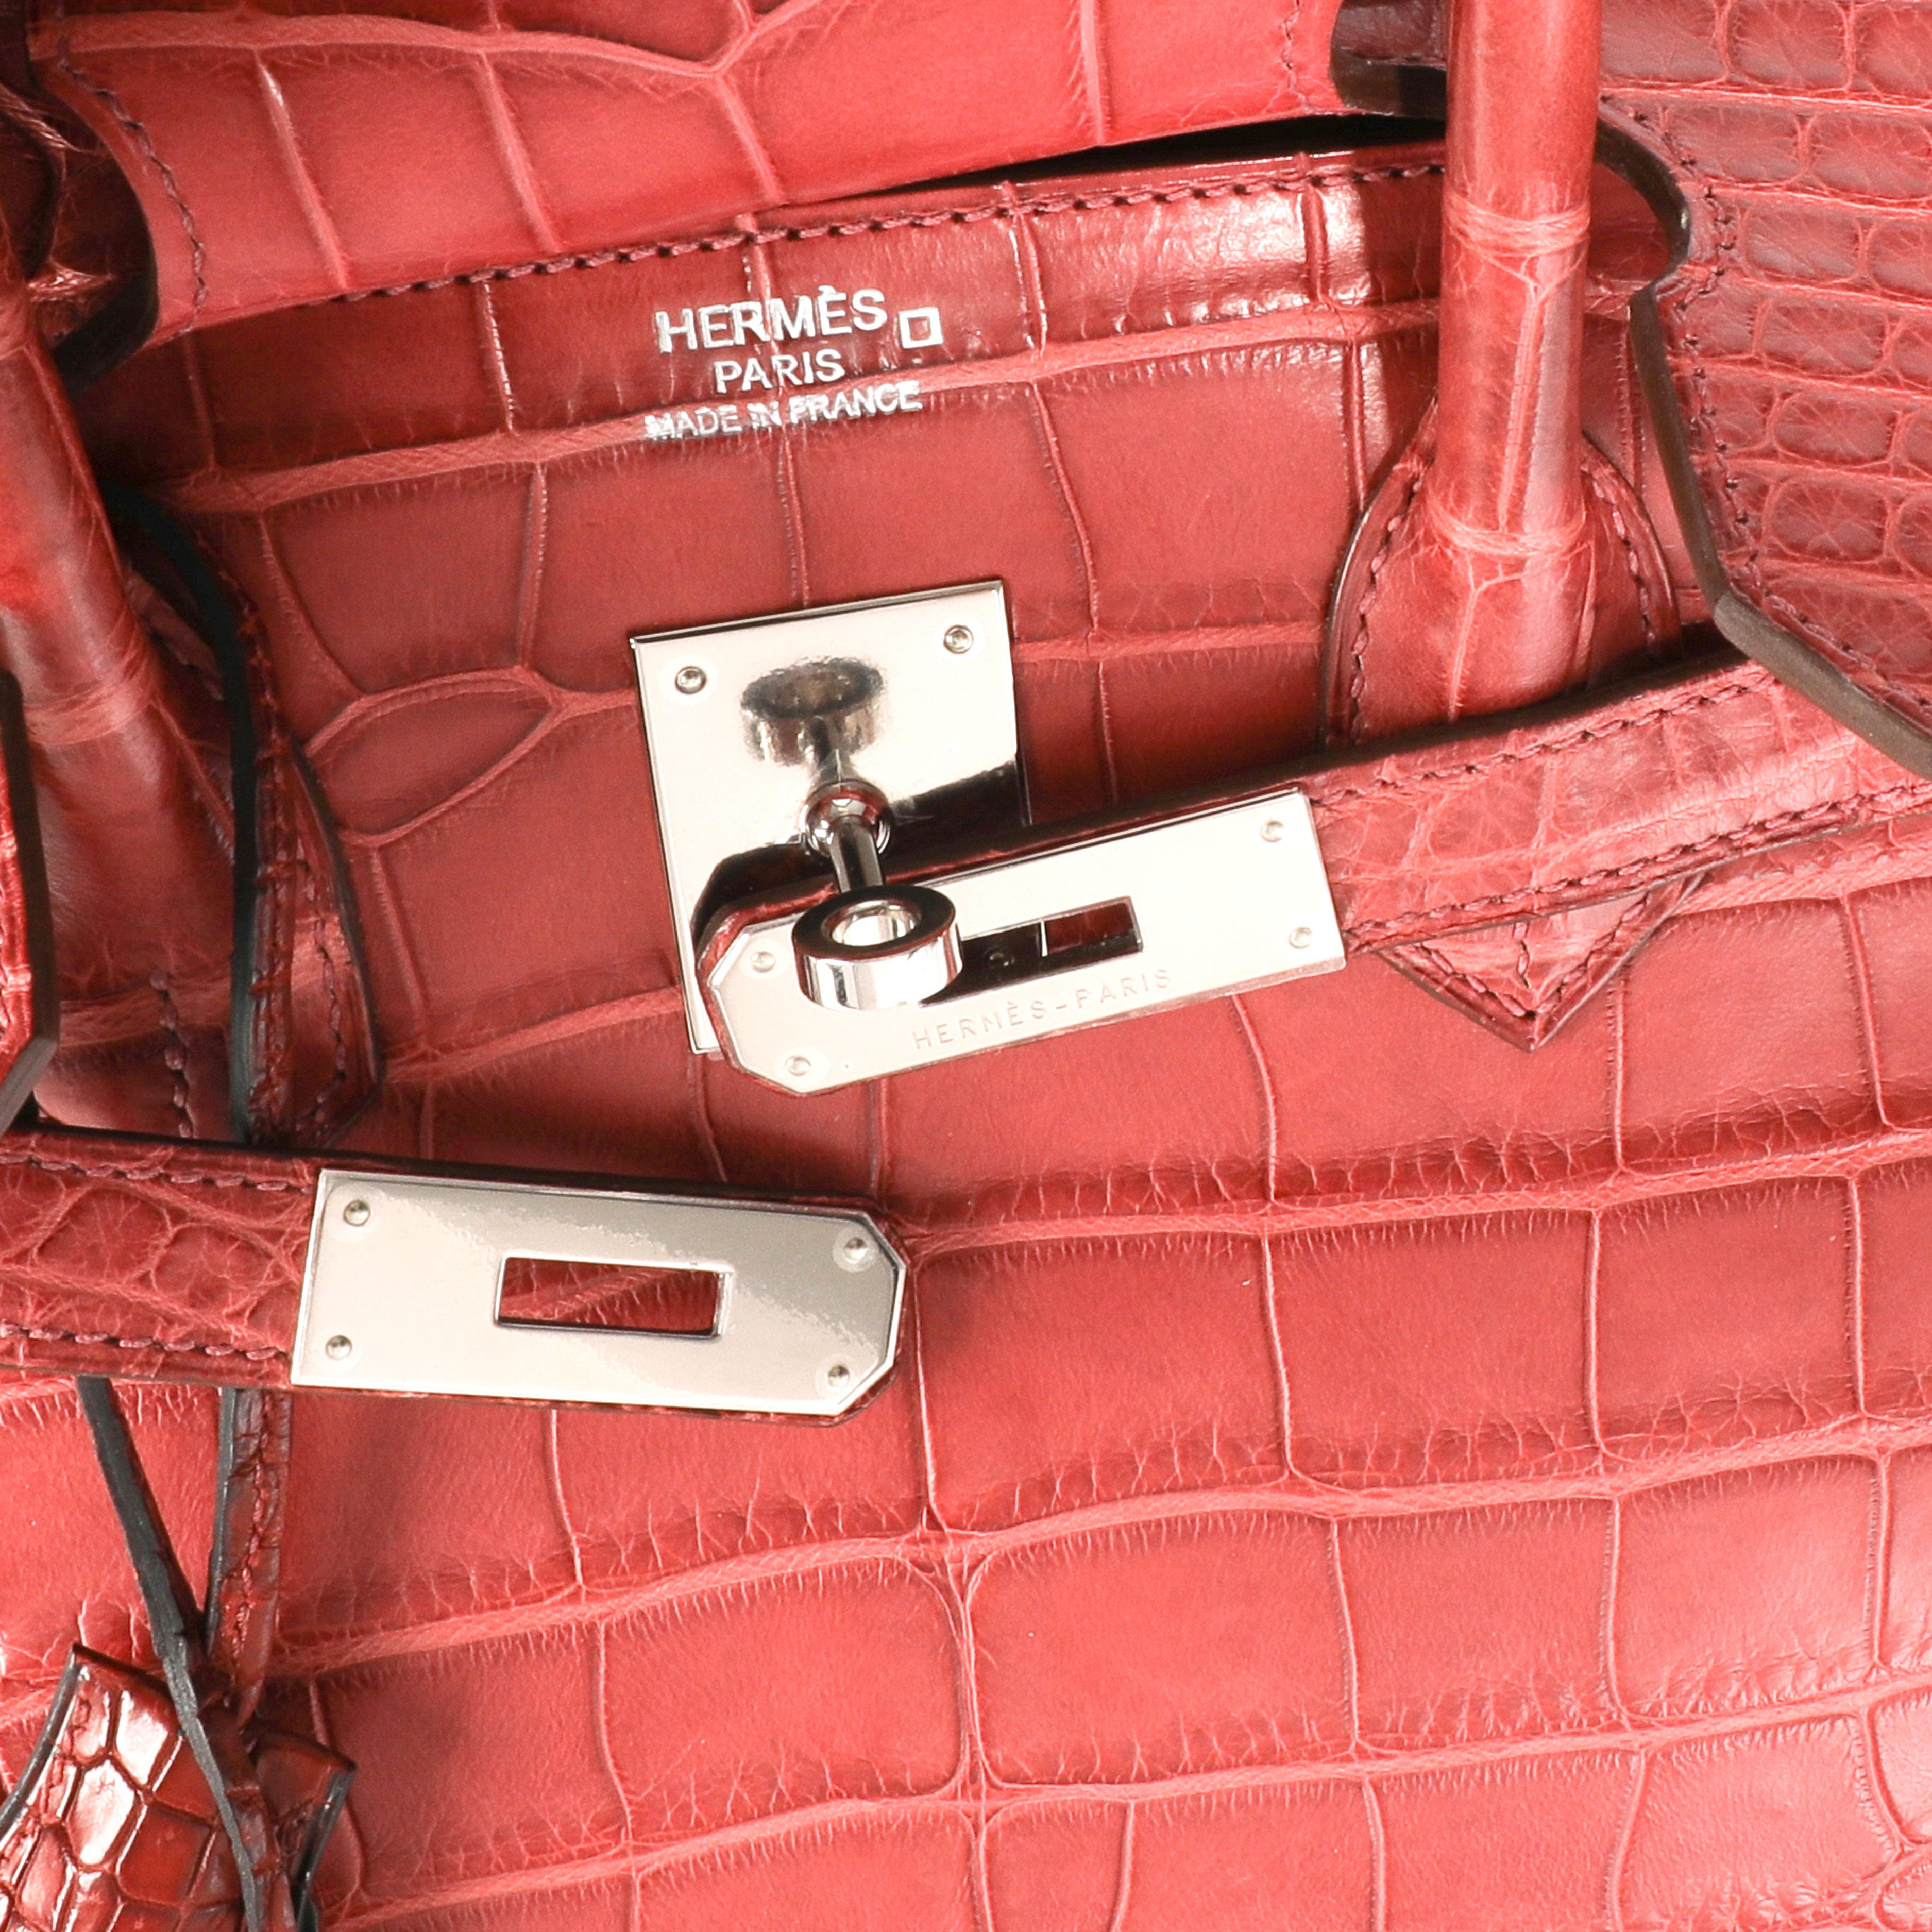 Hermès Bois De Rose Matte Alligator Birkin 35 PHW

Handbag Condition: Very Good
Condition Comments: Very Good Condition. Plastic on some hardware. Natural darkening to skin at corners and handles. Scratching to feet. Due to exotic skin, may not be